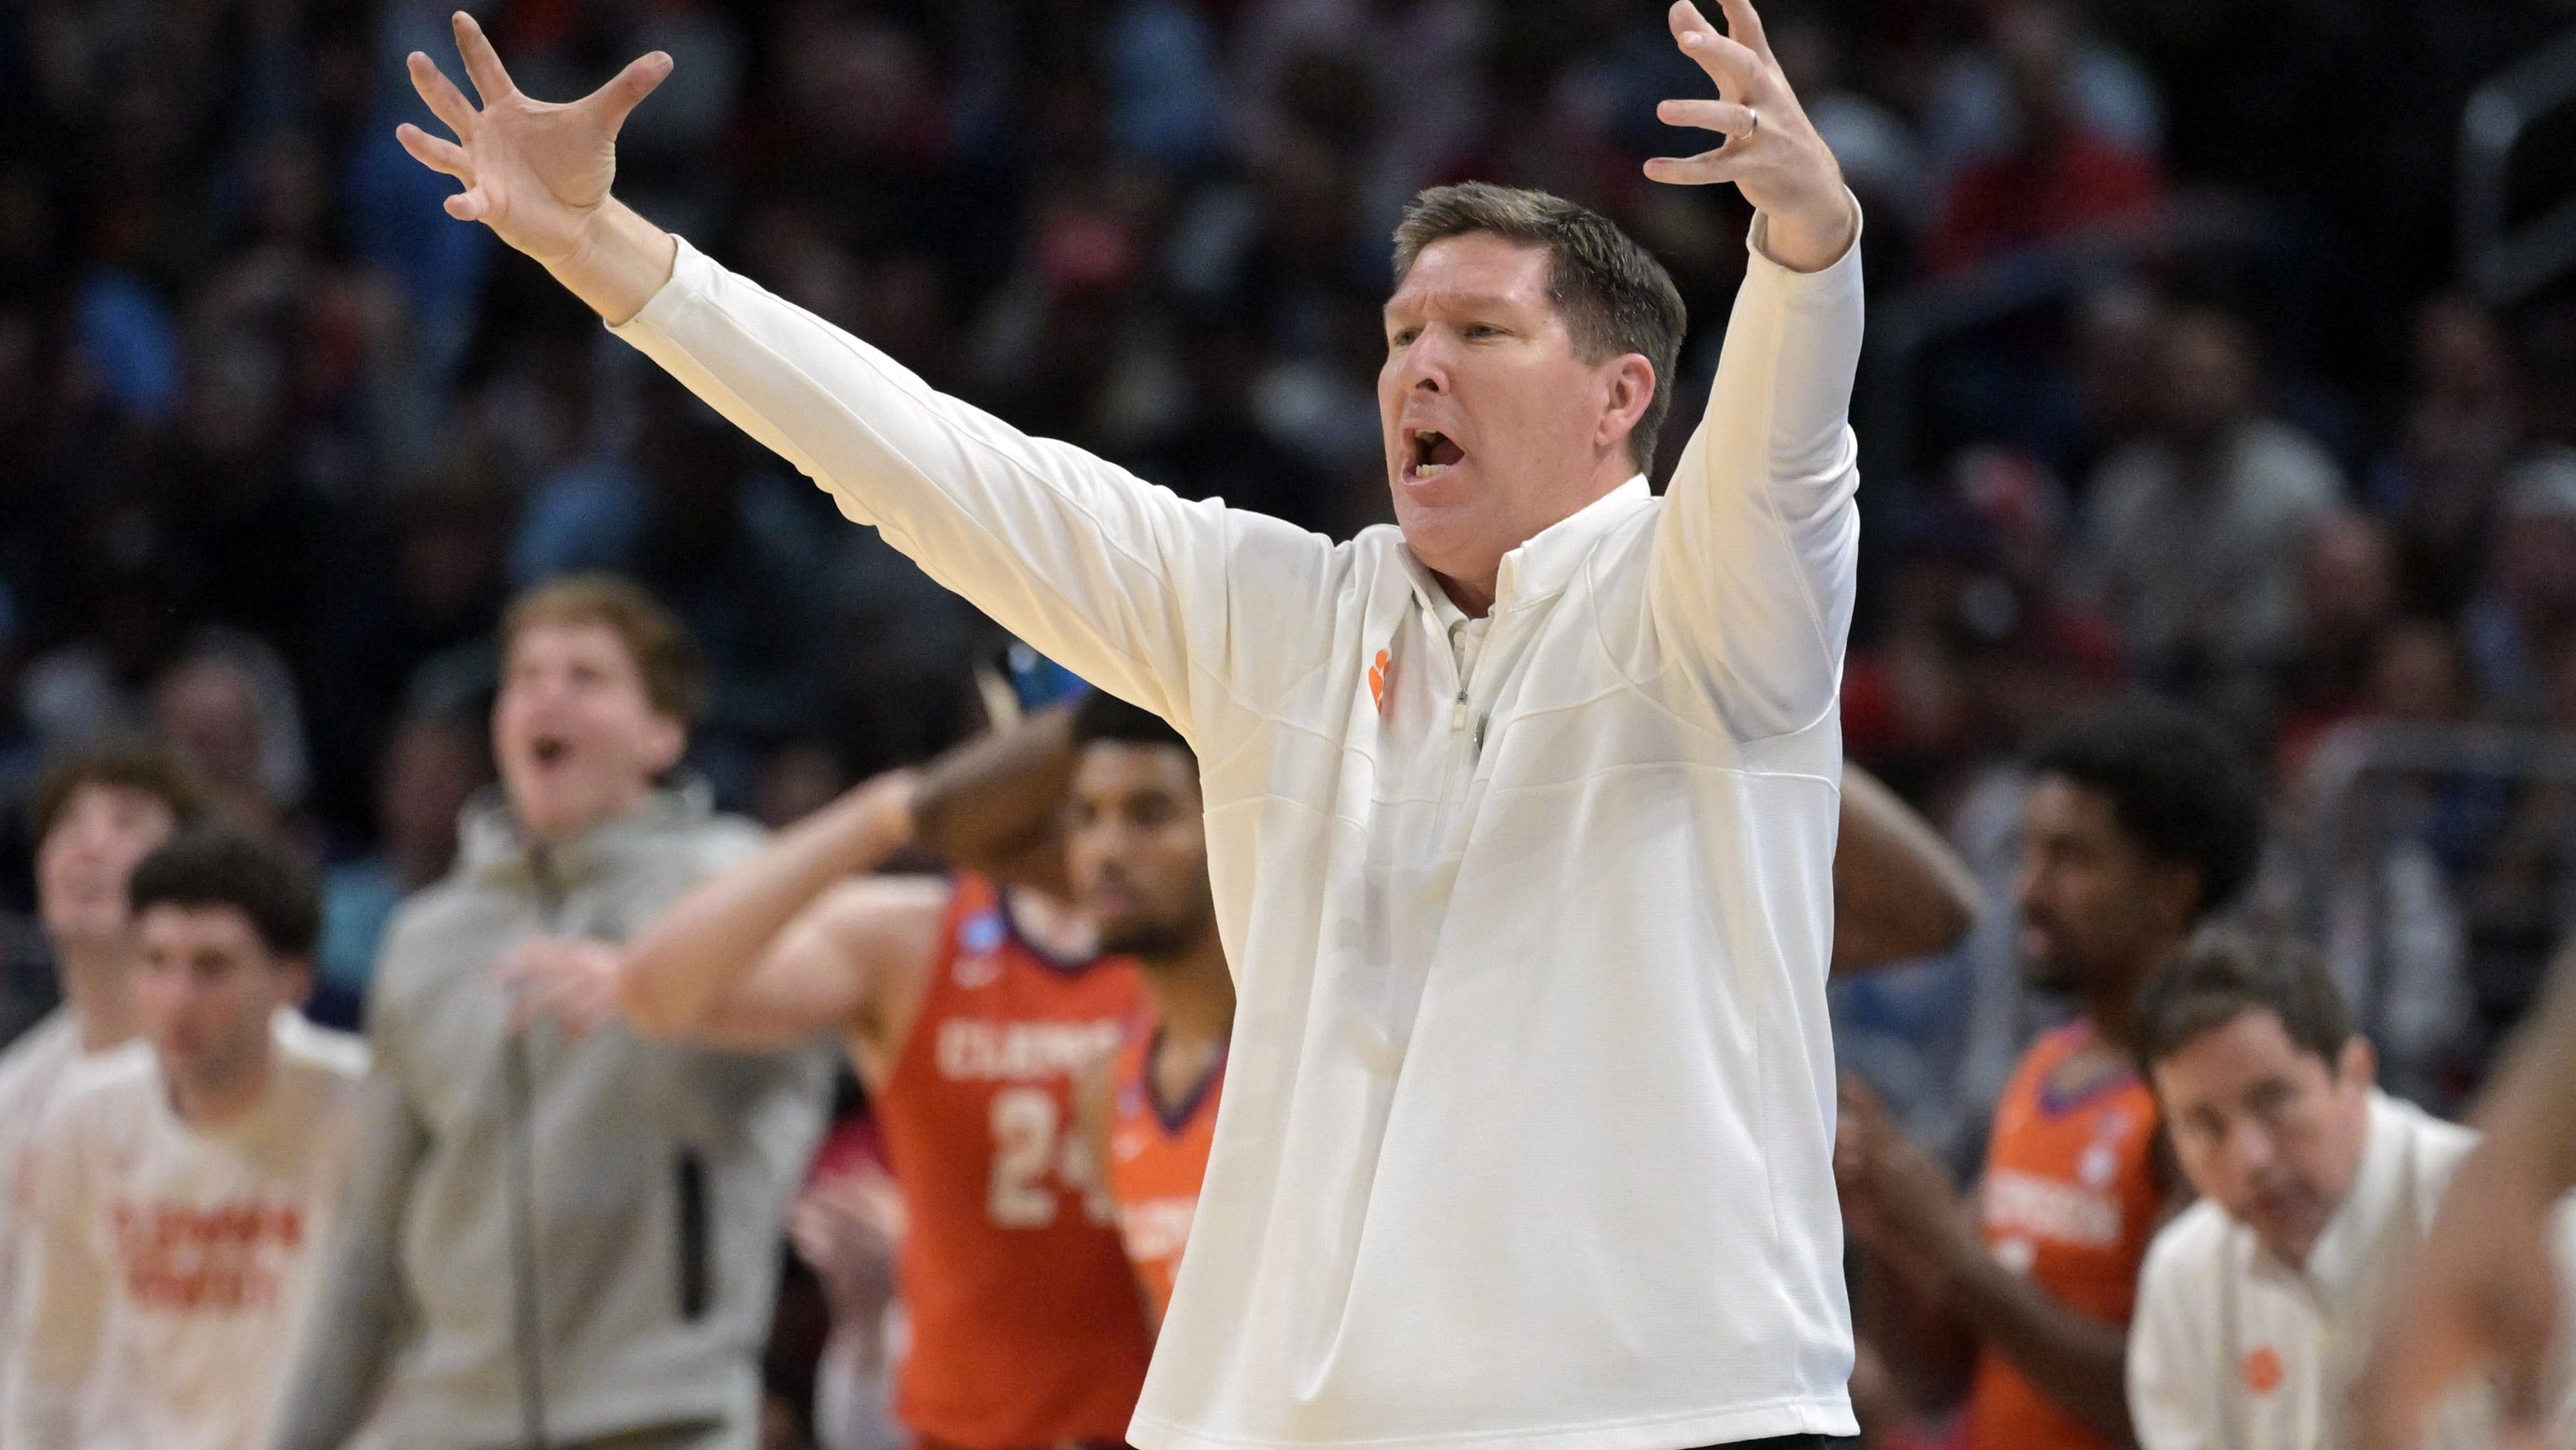 Clemson basketball coach Brad Brownell earns raise, extension after March Madness run